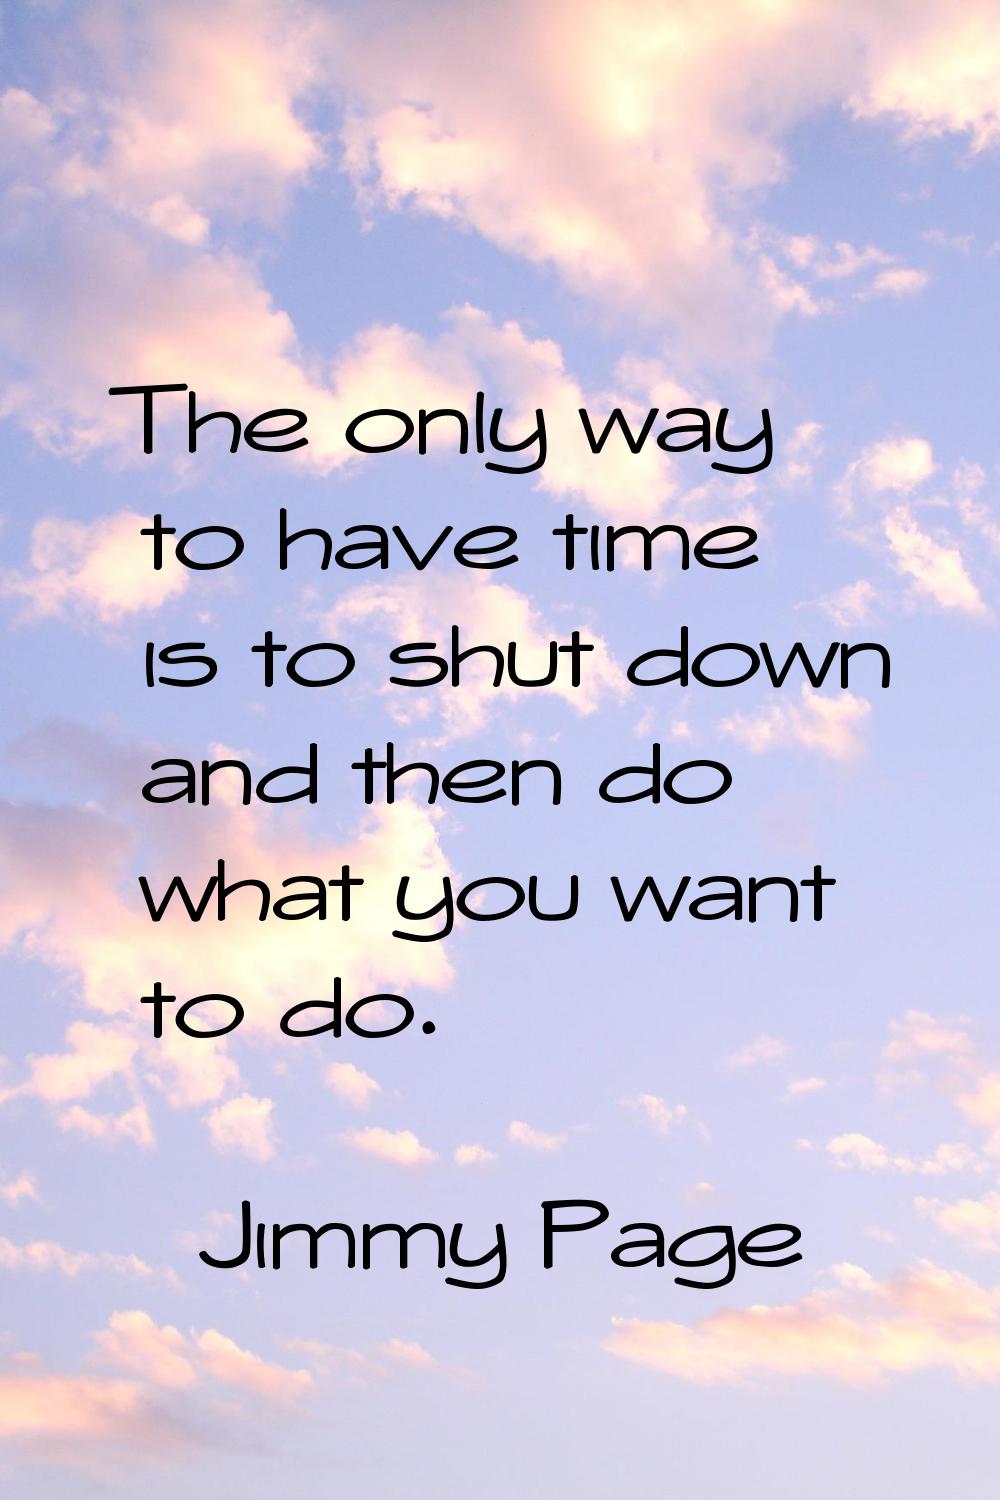 The only way to have time is to shut down and then do what you want to do.